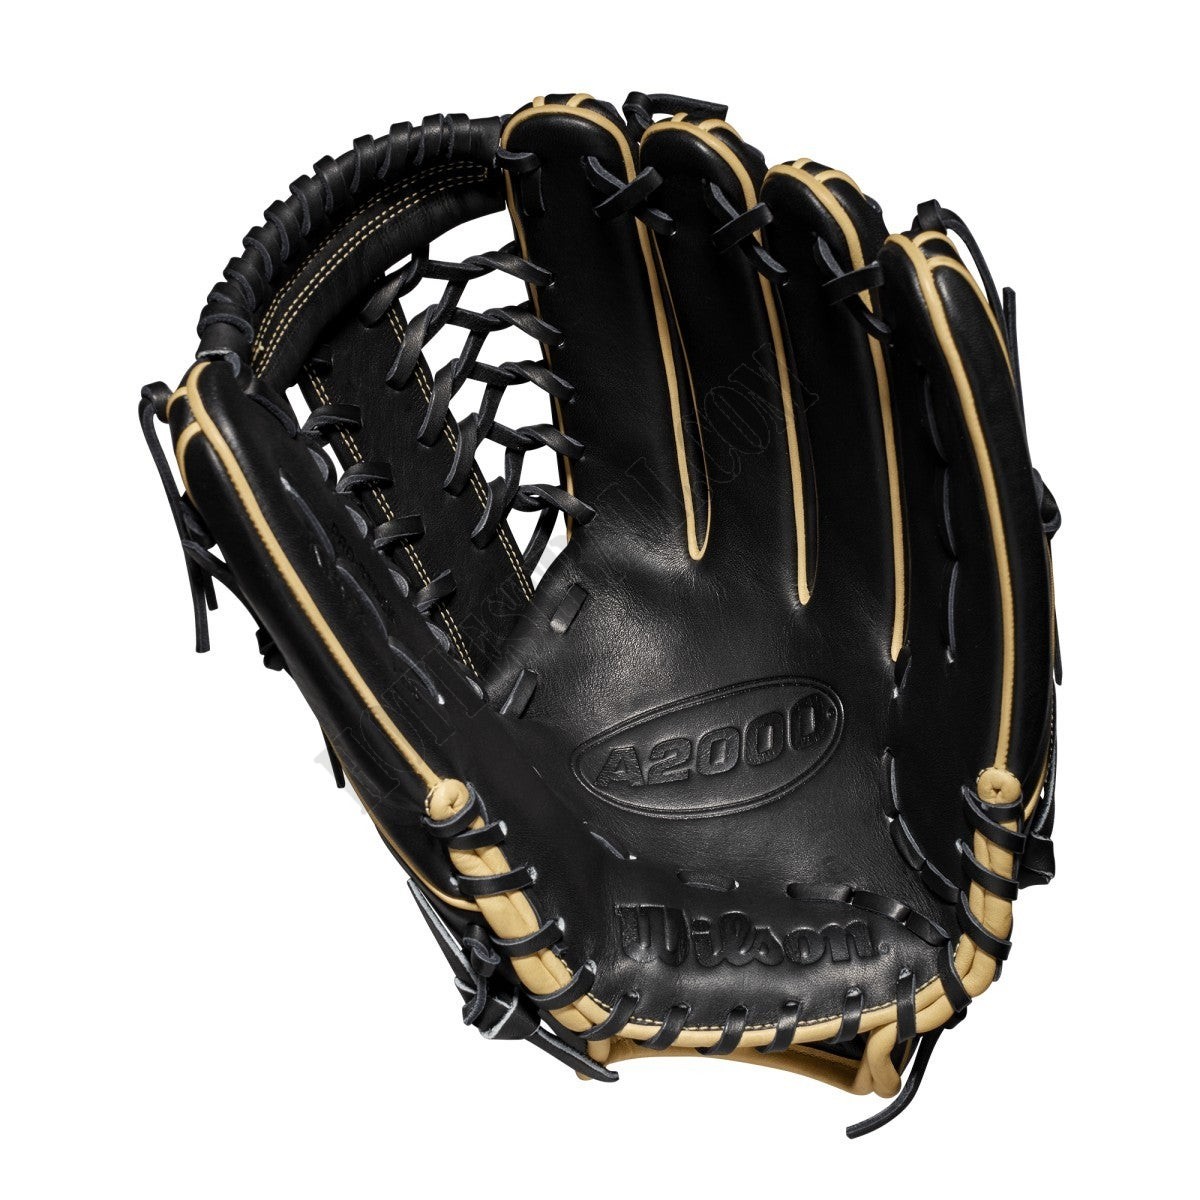 2019 A2000 KP92 12.5" Outfield Baseball Glove ● Wilson Promotions - -2